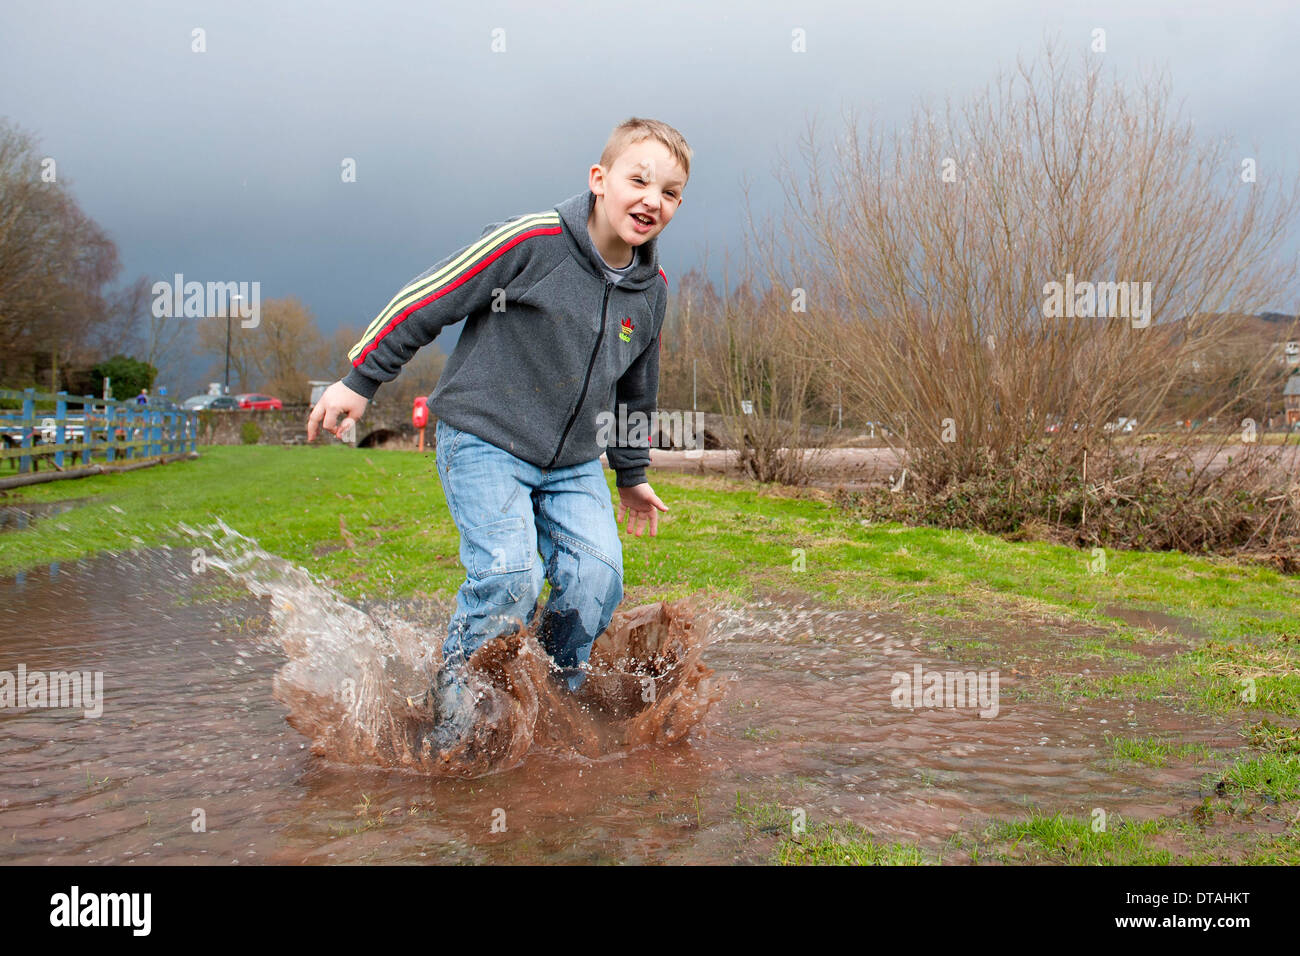 A young boy enjoying wet weather jumping in a puddle and splashing water. Stock Photo